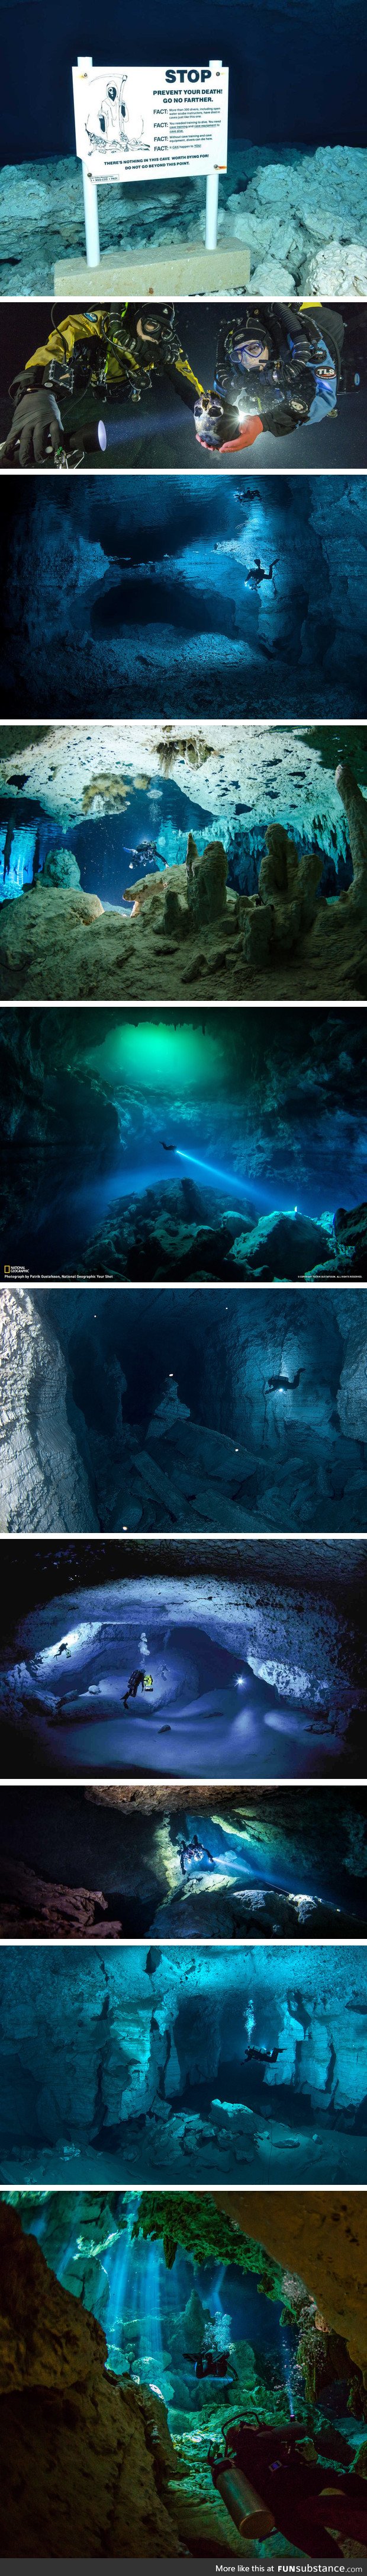 Below the surface of the Earth